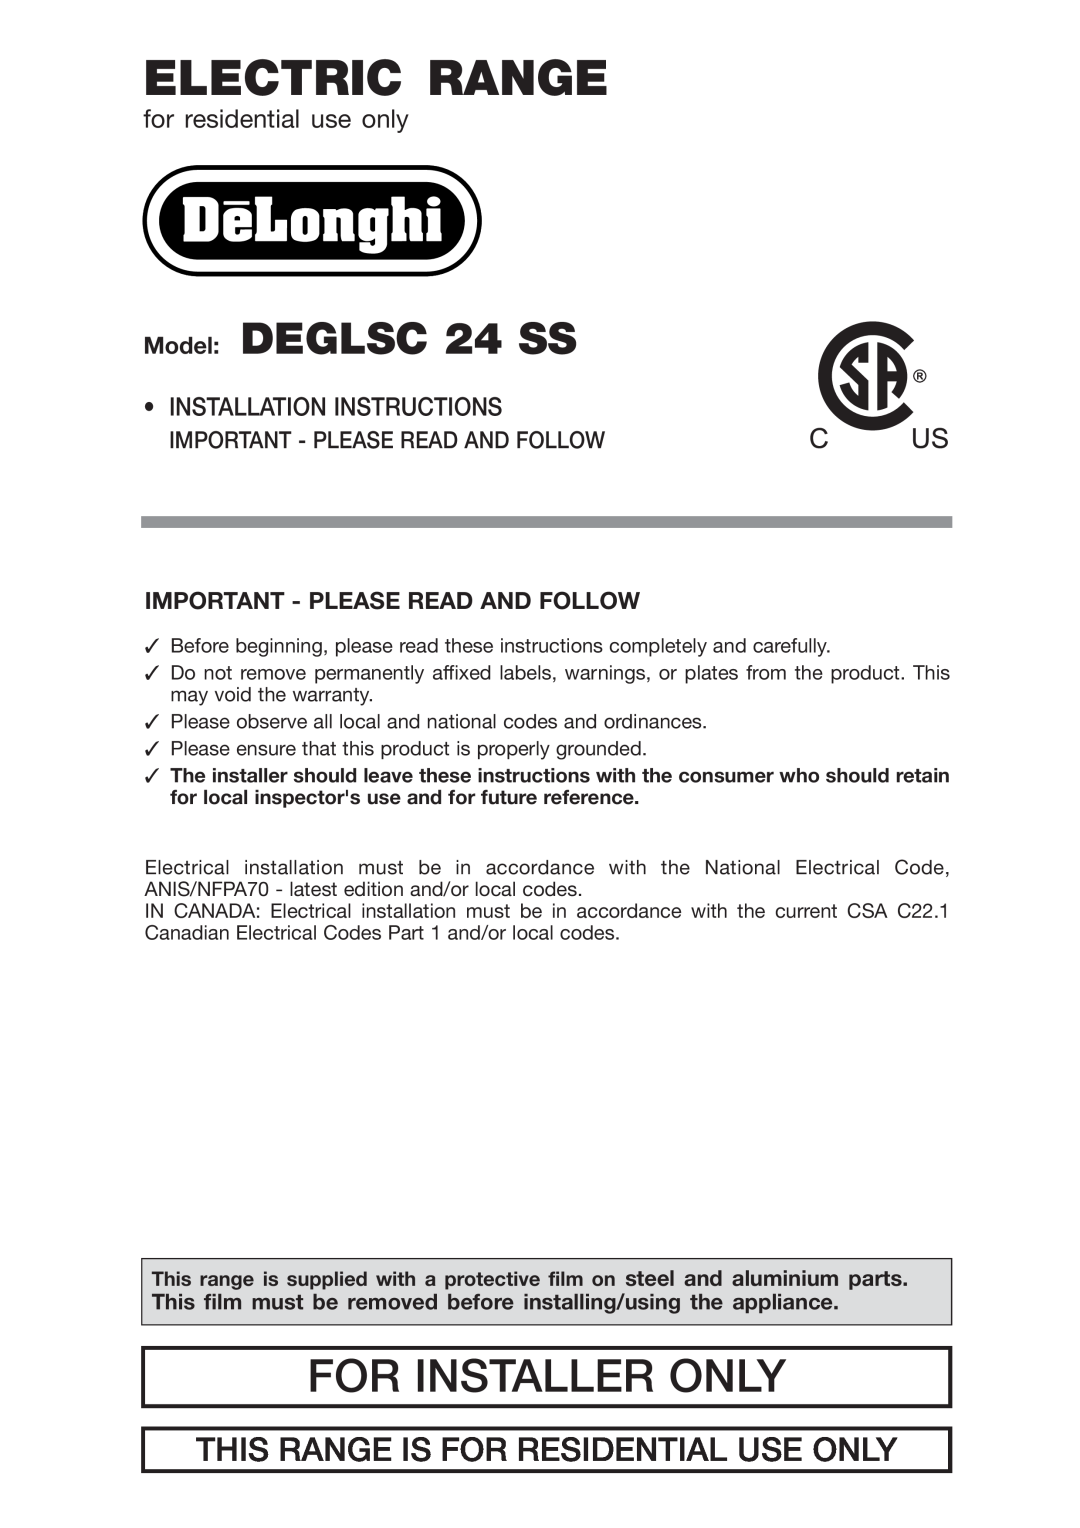 DeLonghi warranty Important - Please Read And Follow, Electric Range, For Installer Only, Model DEGLSC 24 SS 